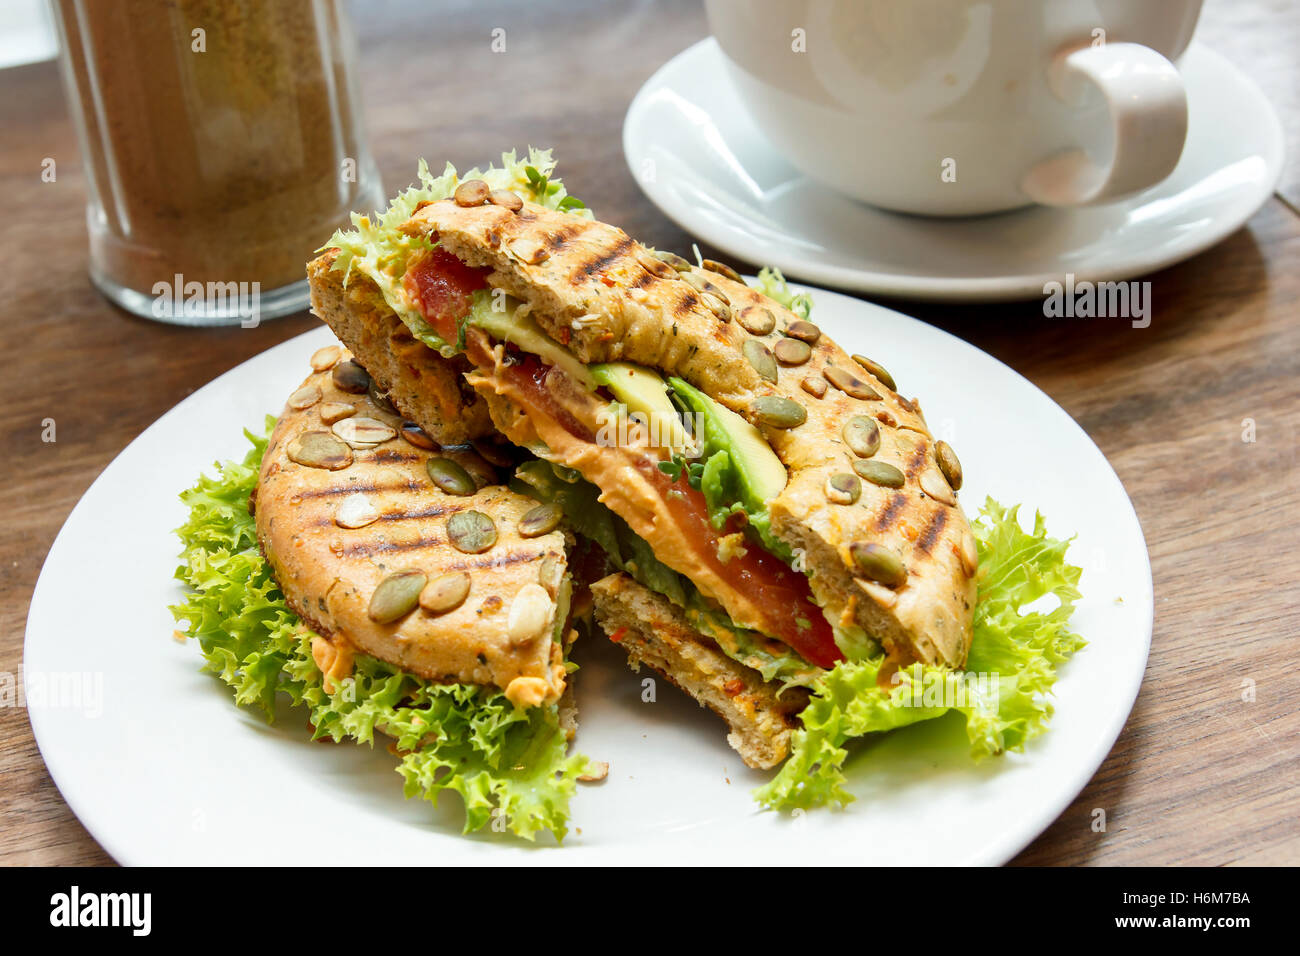 Toasted filled bagel with salad on a white plate in a cafe. Stock Photo